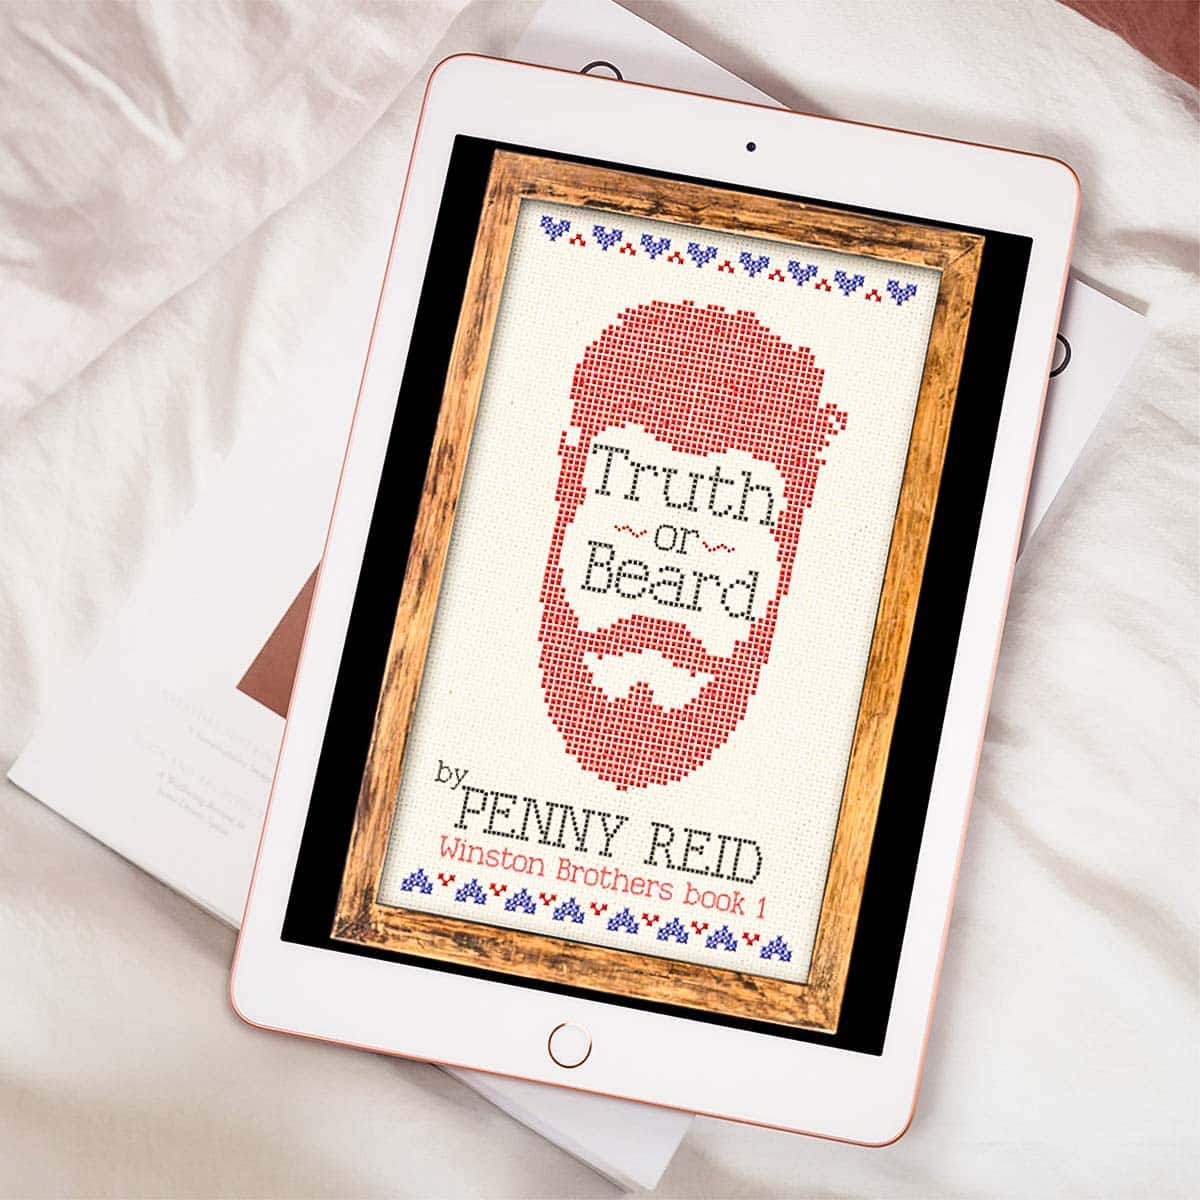 Truth or Beard by Penny Reid – Winston Brothers Book 1